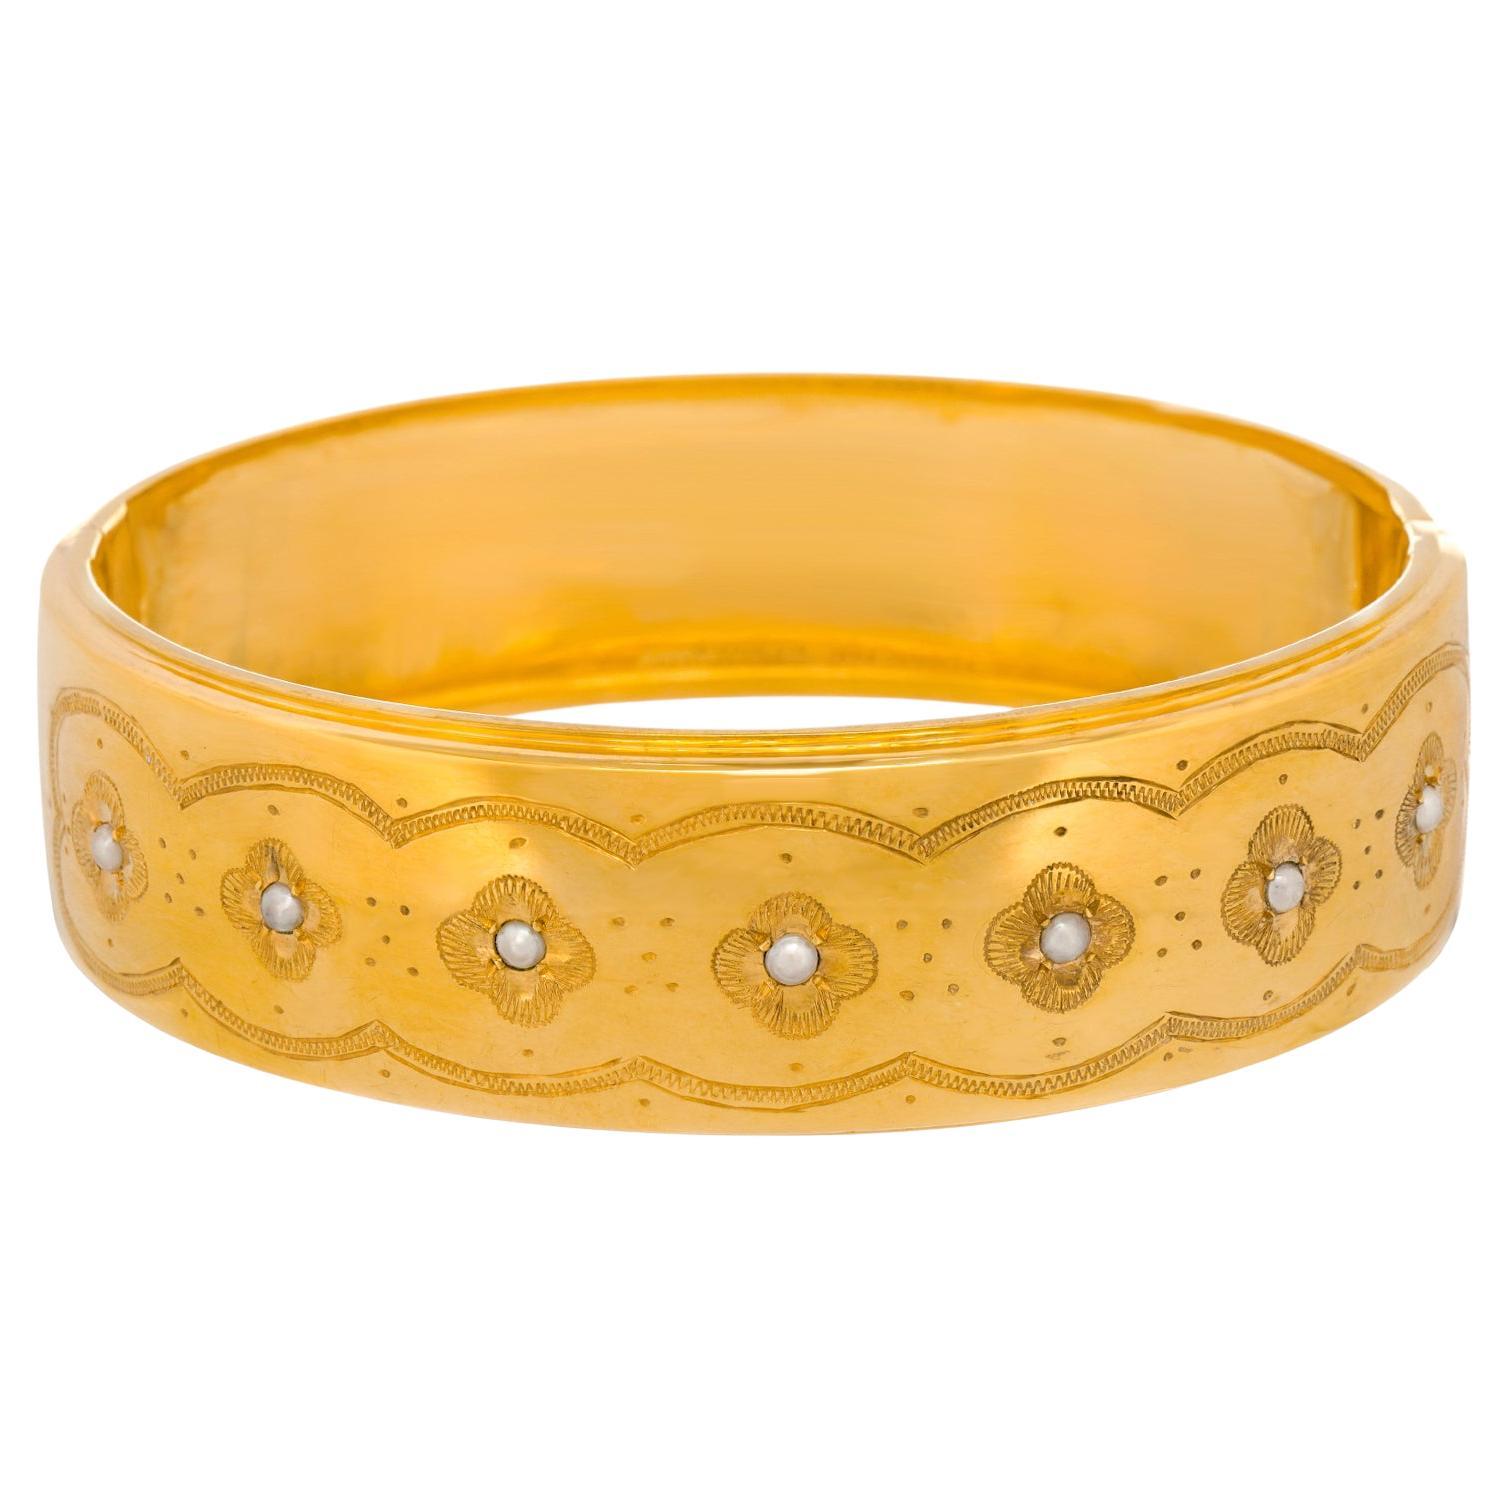 Forties French Bangle 18k